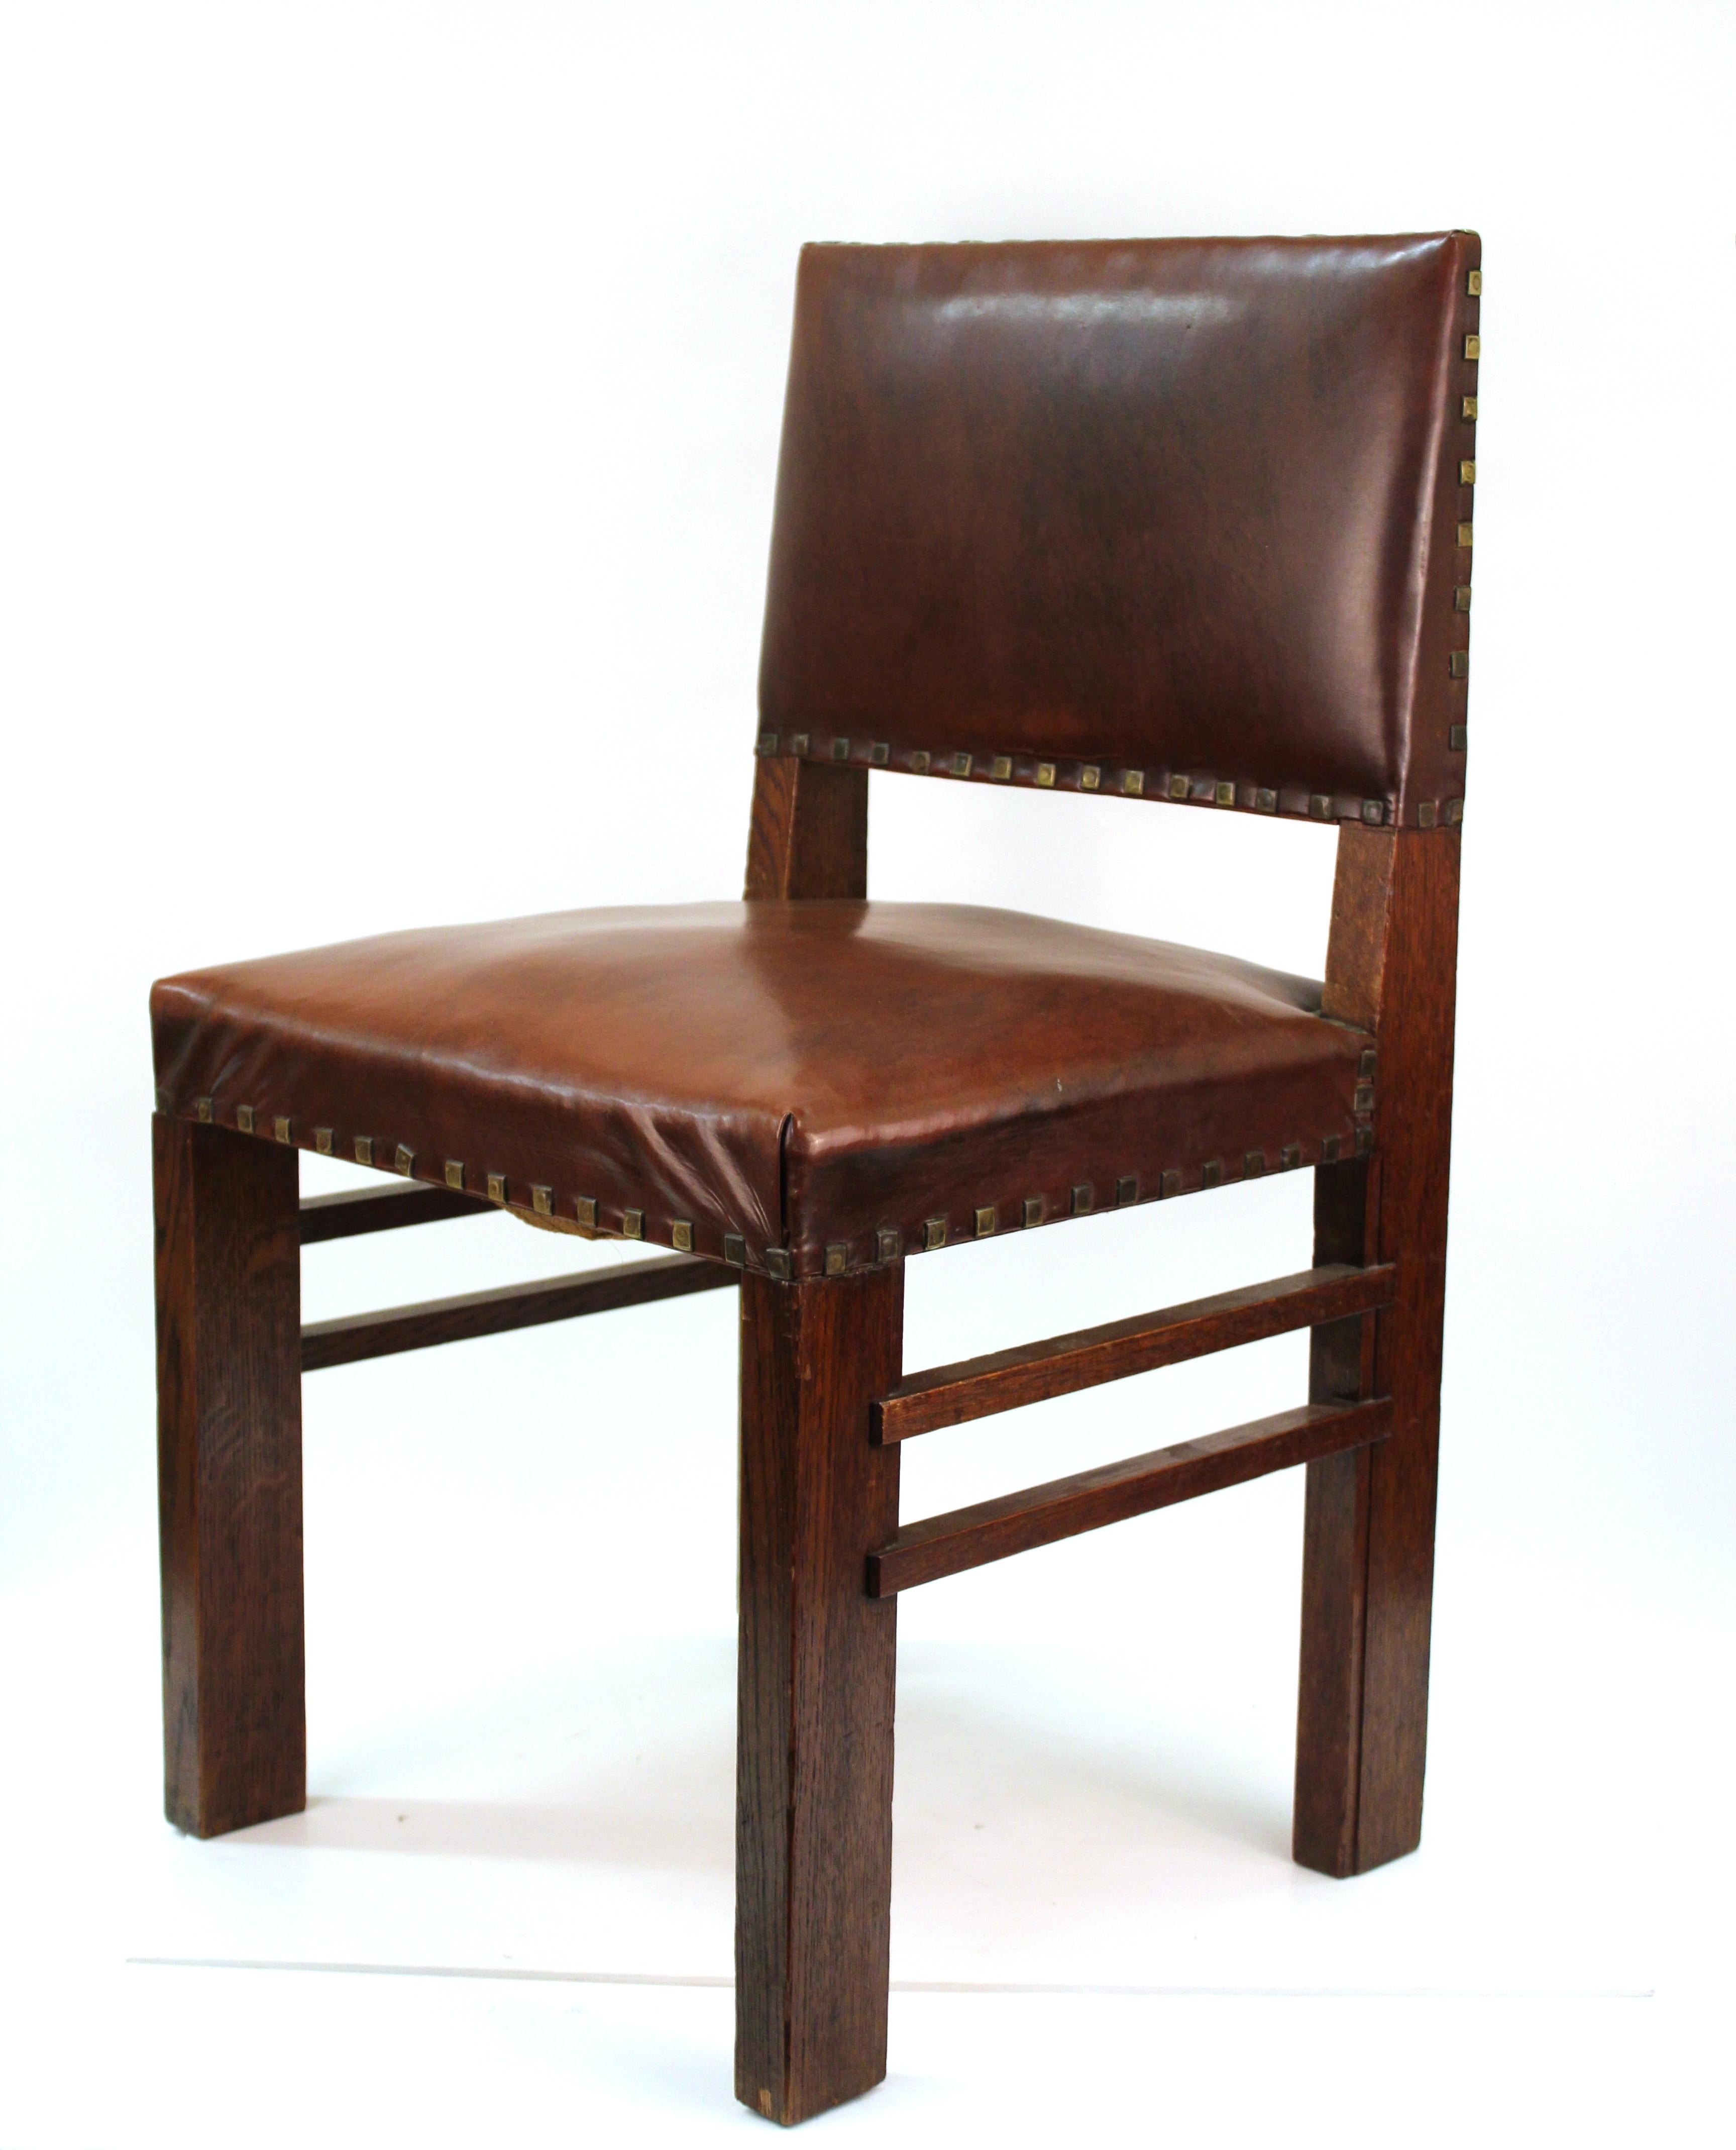 American Arts & Crafts period set of dining chairs in oak-wood and cognac colored leather seats and backs. Made in the United States during the 1910s, with one of the leather seats replaced. Some age-appropriate wear and use to the wood, with one